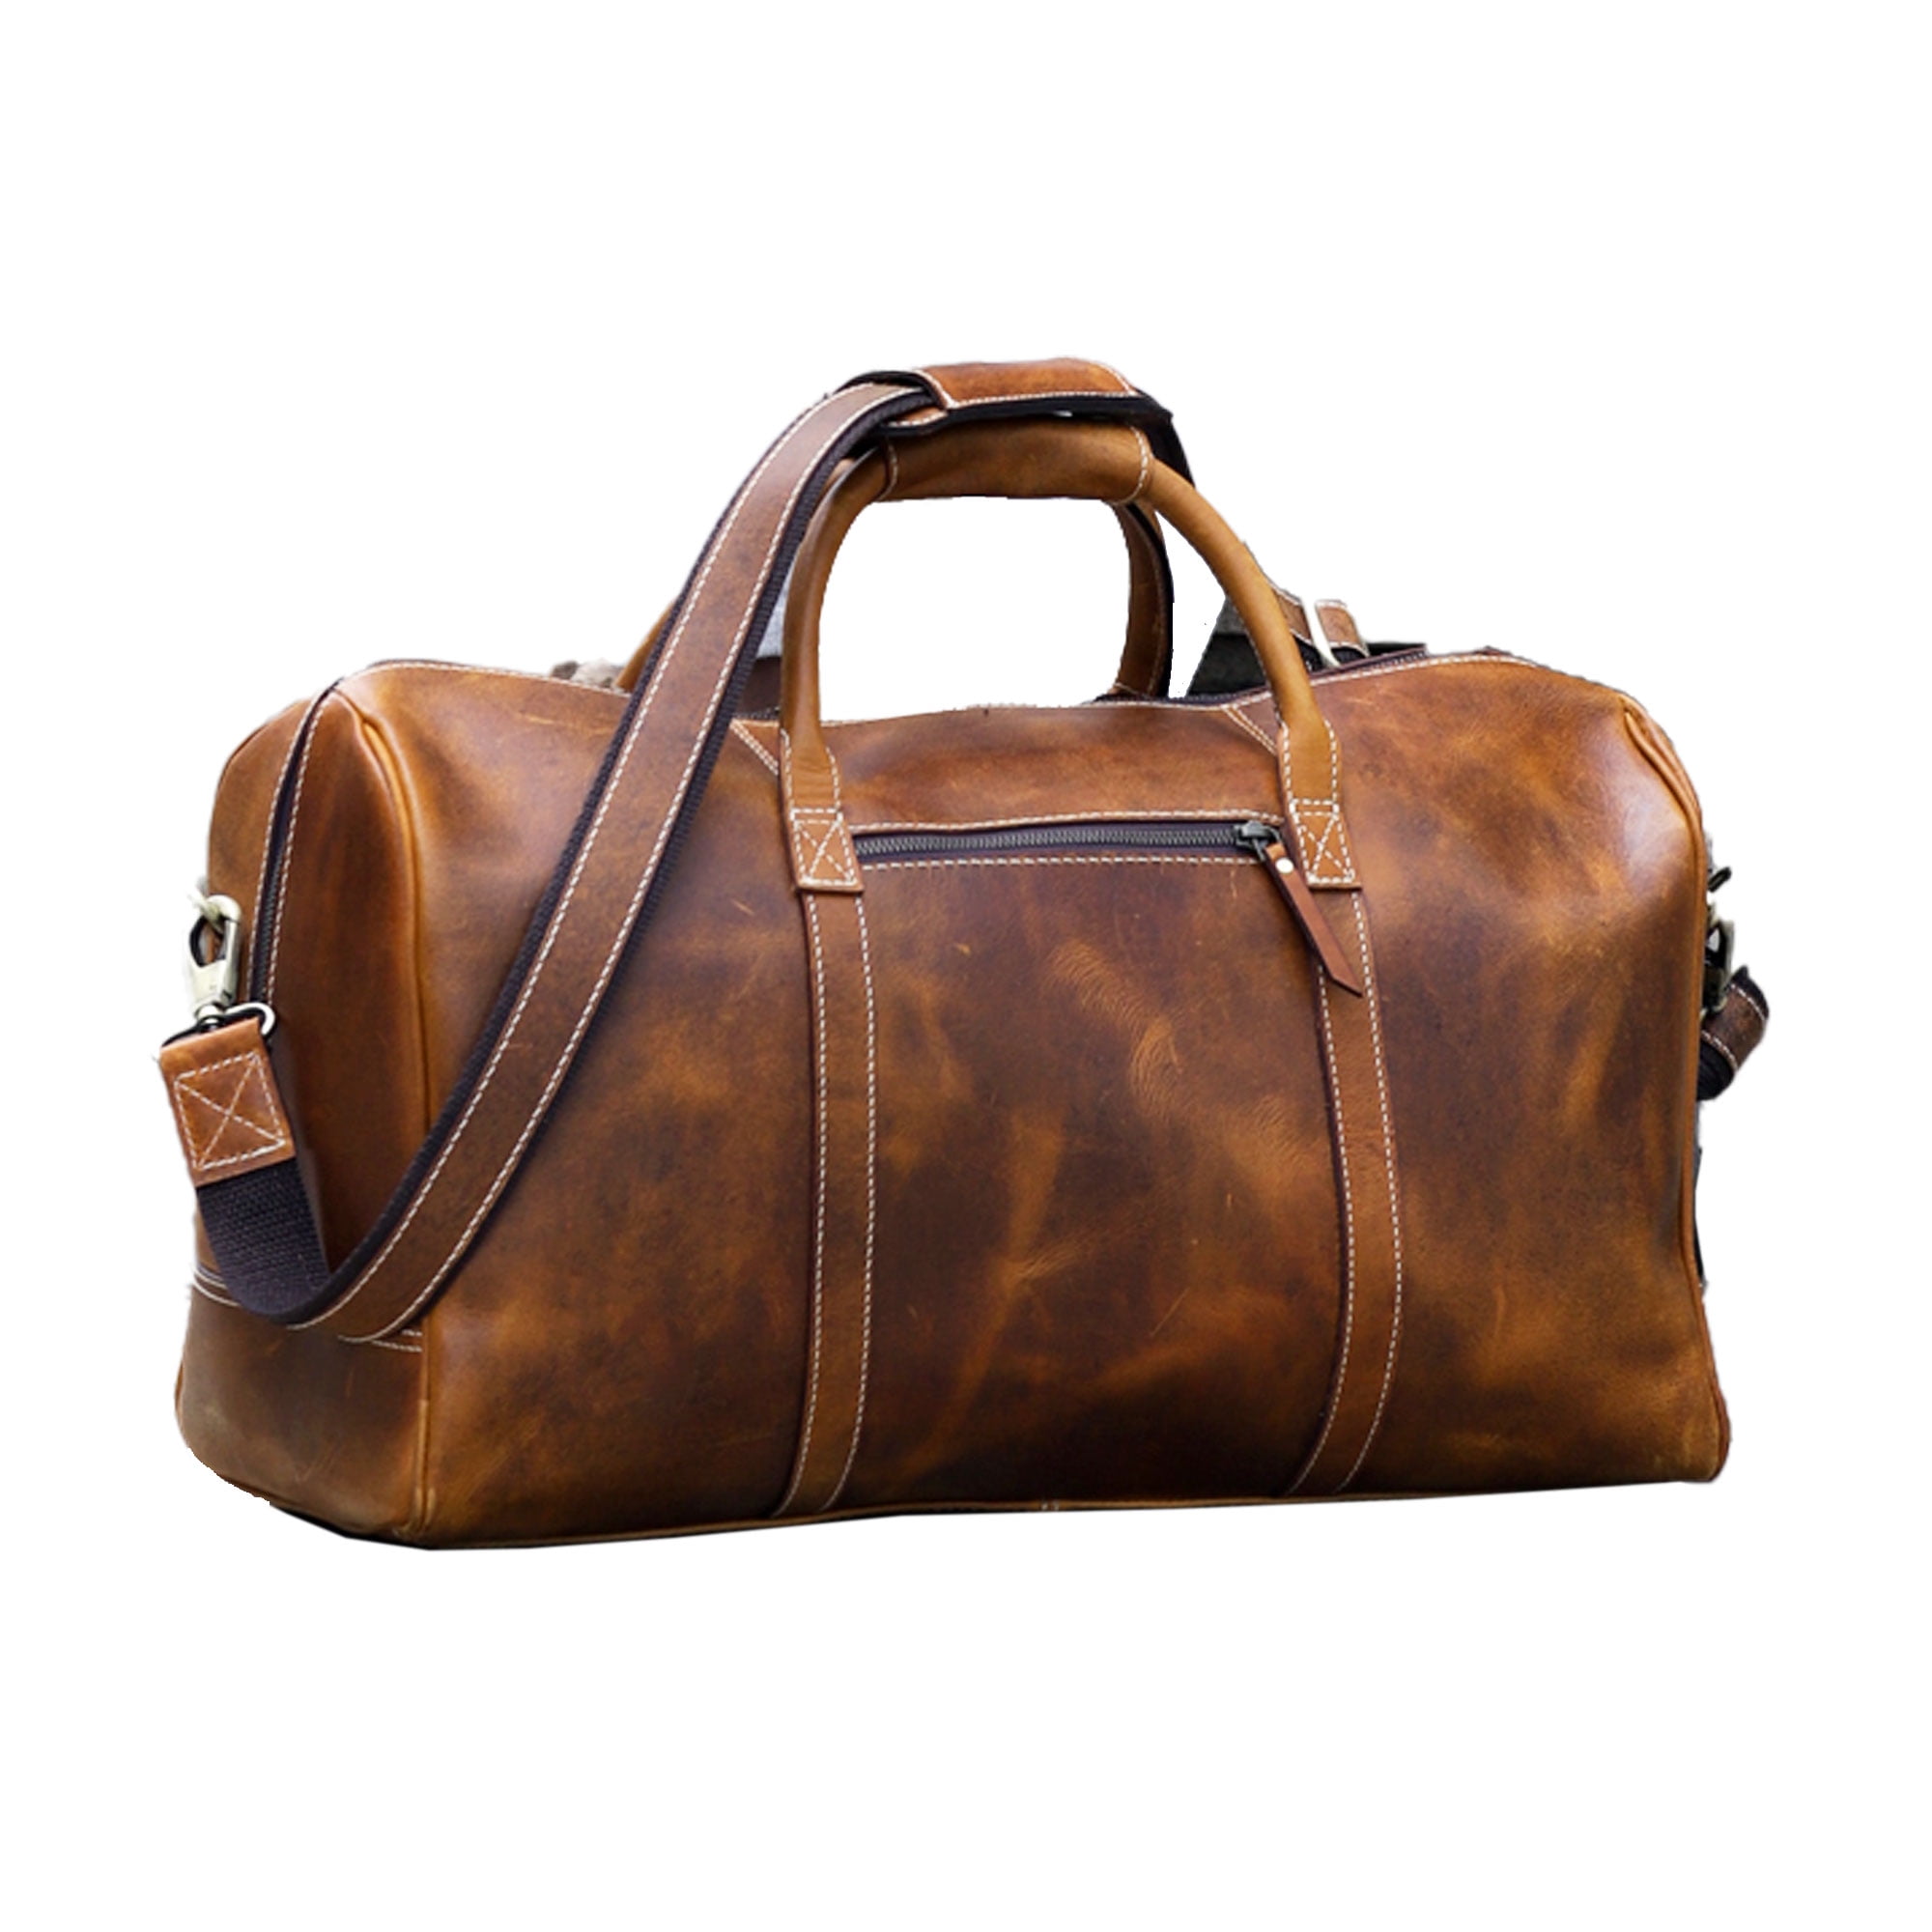 LEATHER HOLDALL GYM BAG TRAVEL DUFFEL SPORTS CABIN COWHIDE LEATHER BAG MENS 